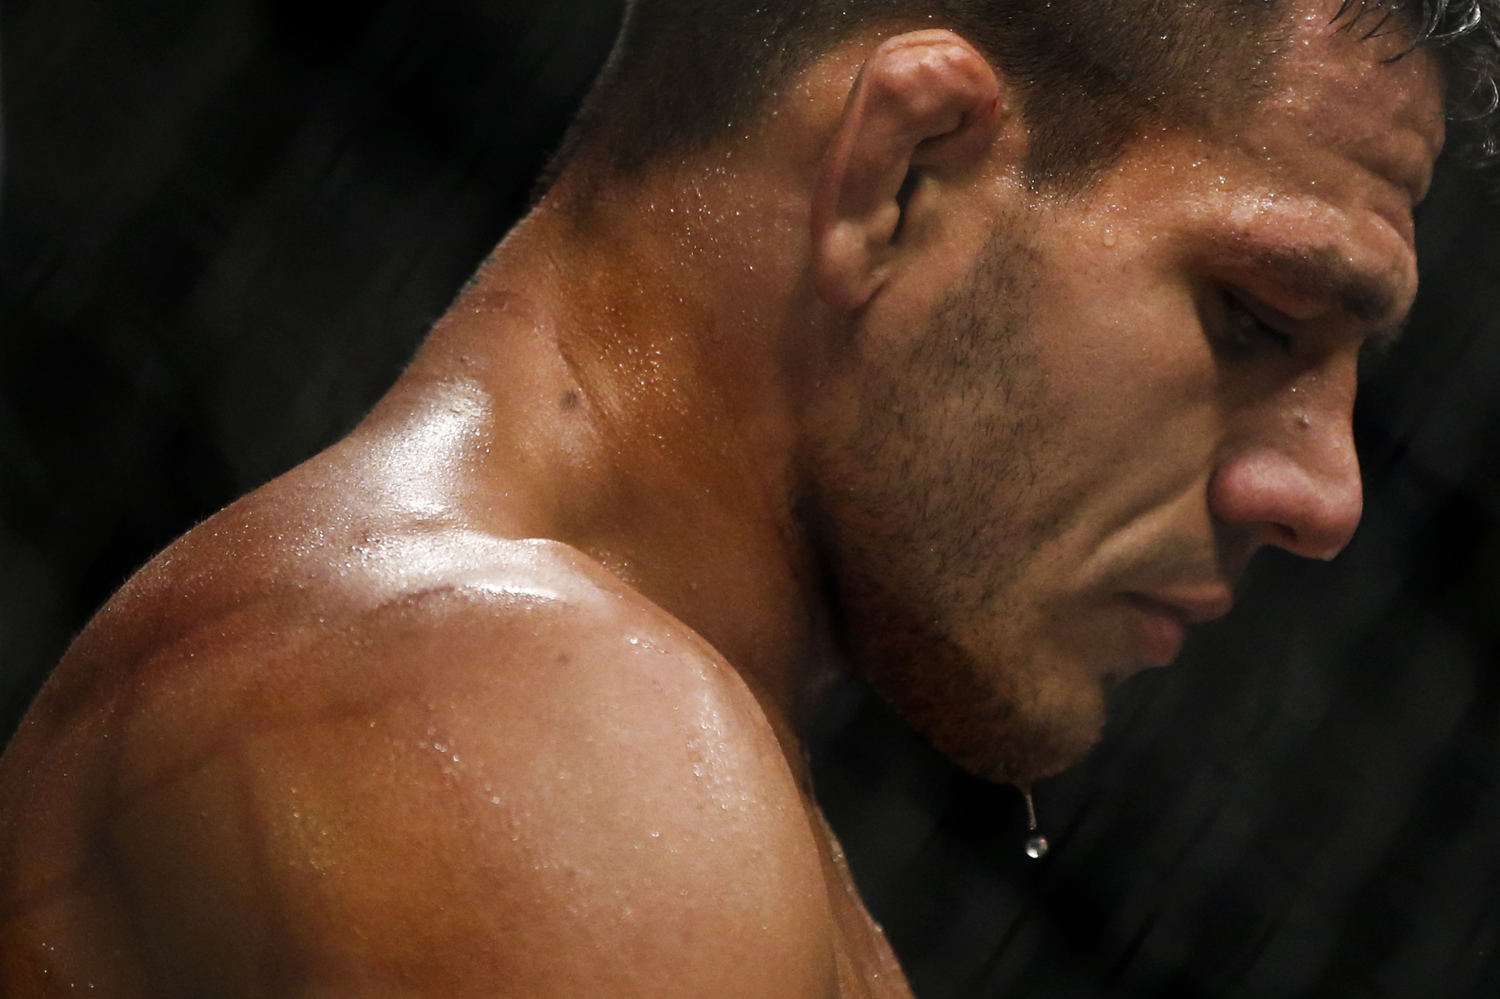  Rafael dos Anjos of Brazil takes a break during welterweight bout against Tarec Saffiedine of Belgium during the UFC Fight Night at the Singapore Indoor Stadium on June 17, 2017. 